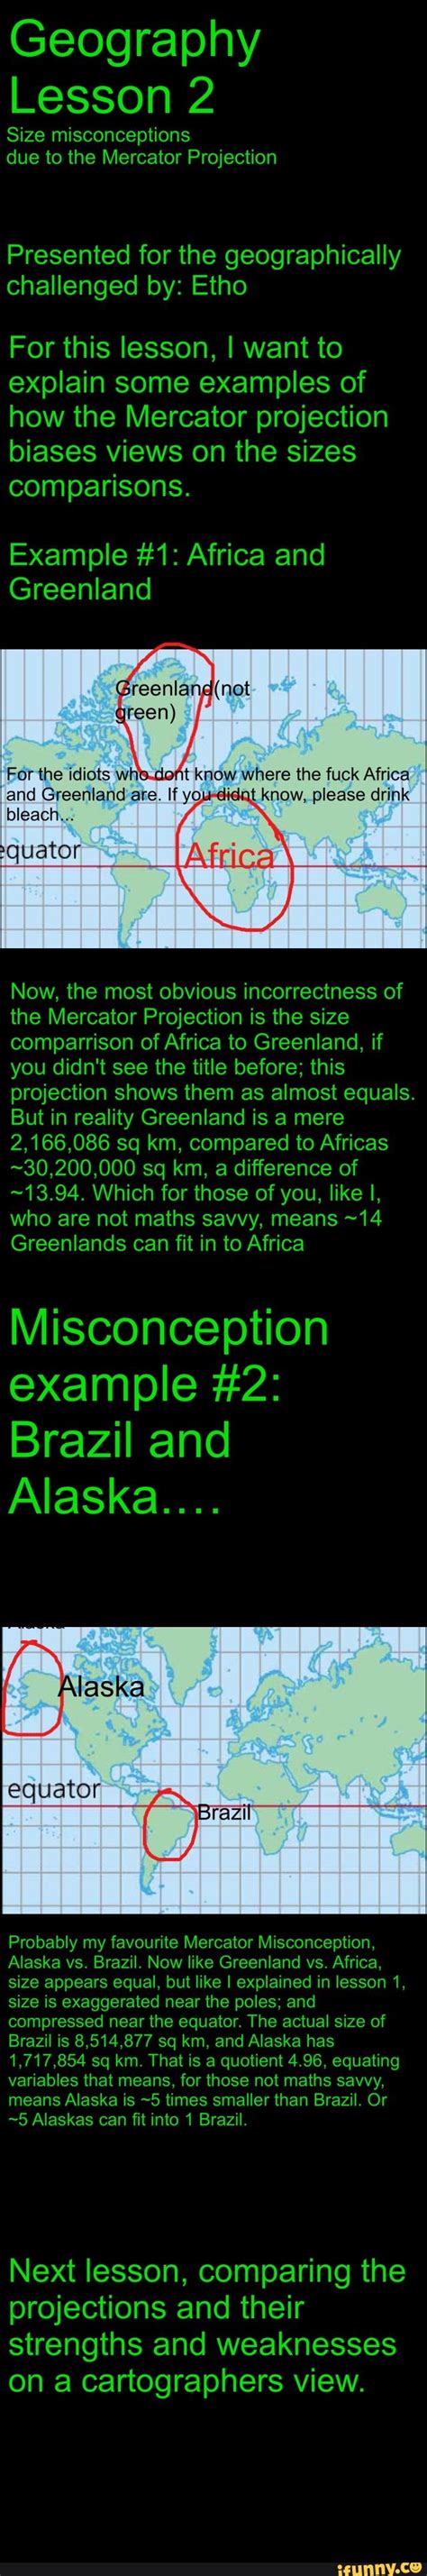 Geography Lesson 2 Size Misconceptions Presented For The Geographically